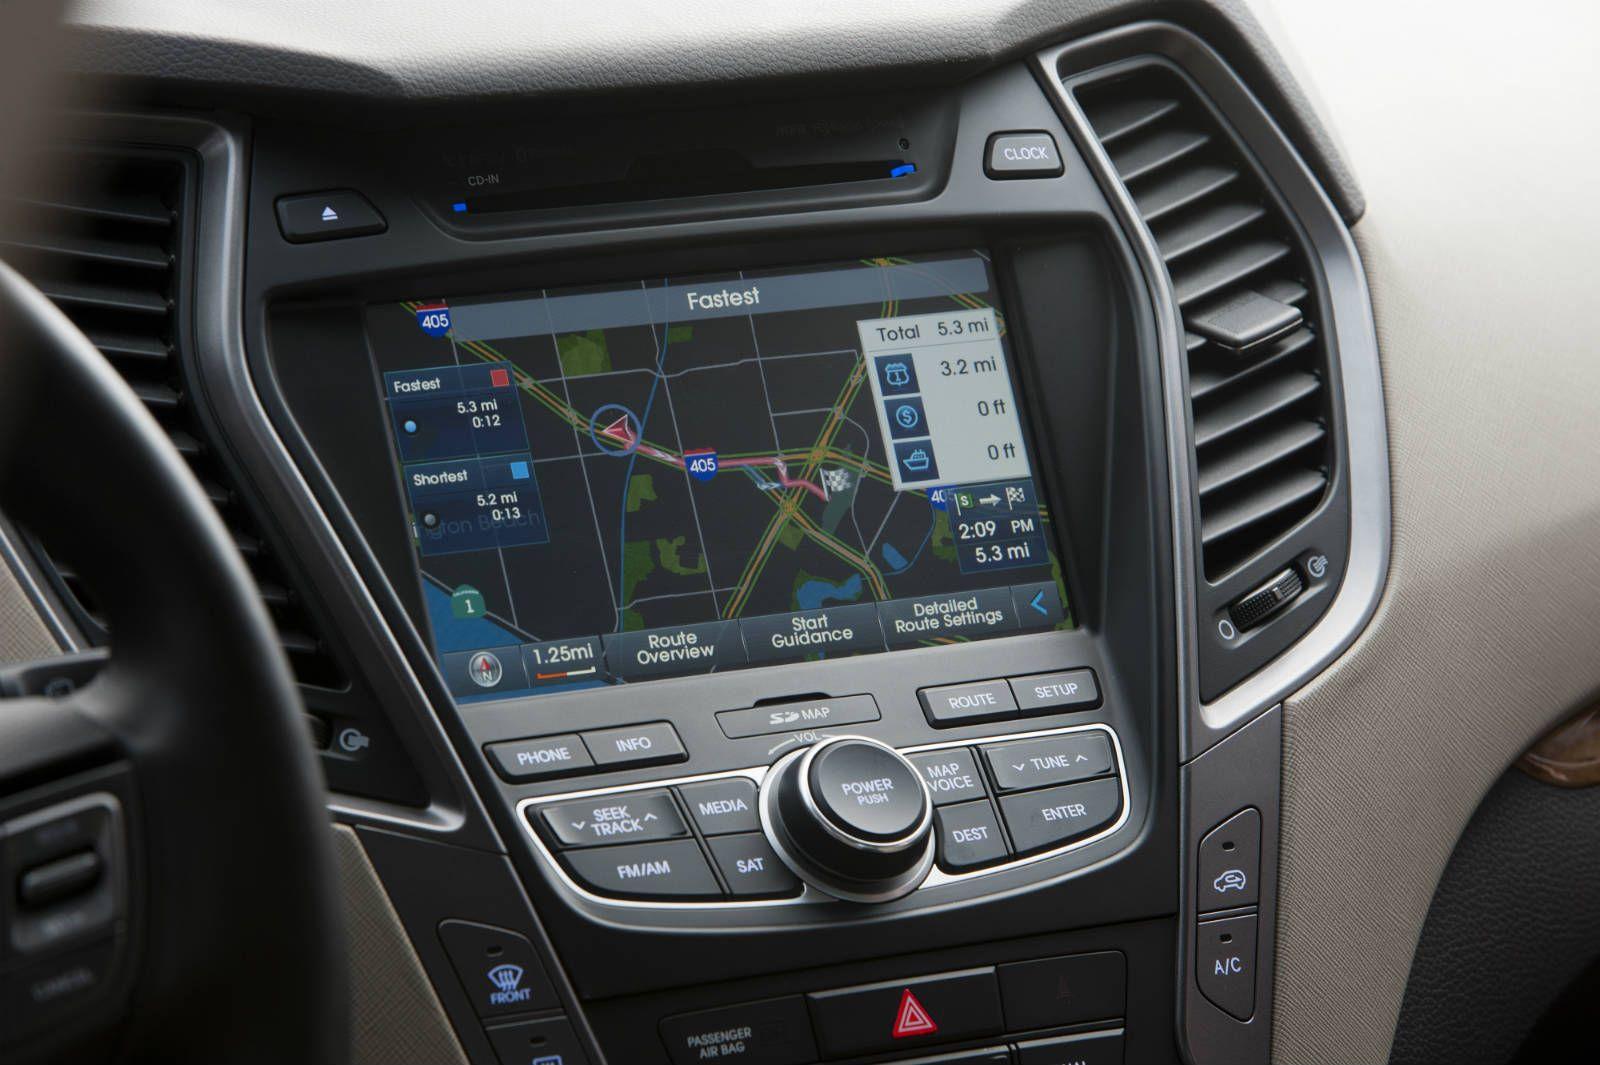 Advantages of Car's Factory over Portable Navigation Systems